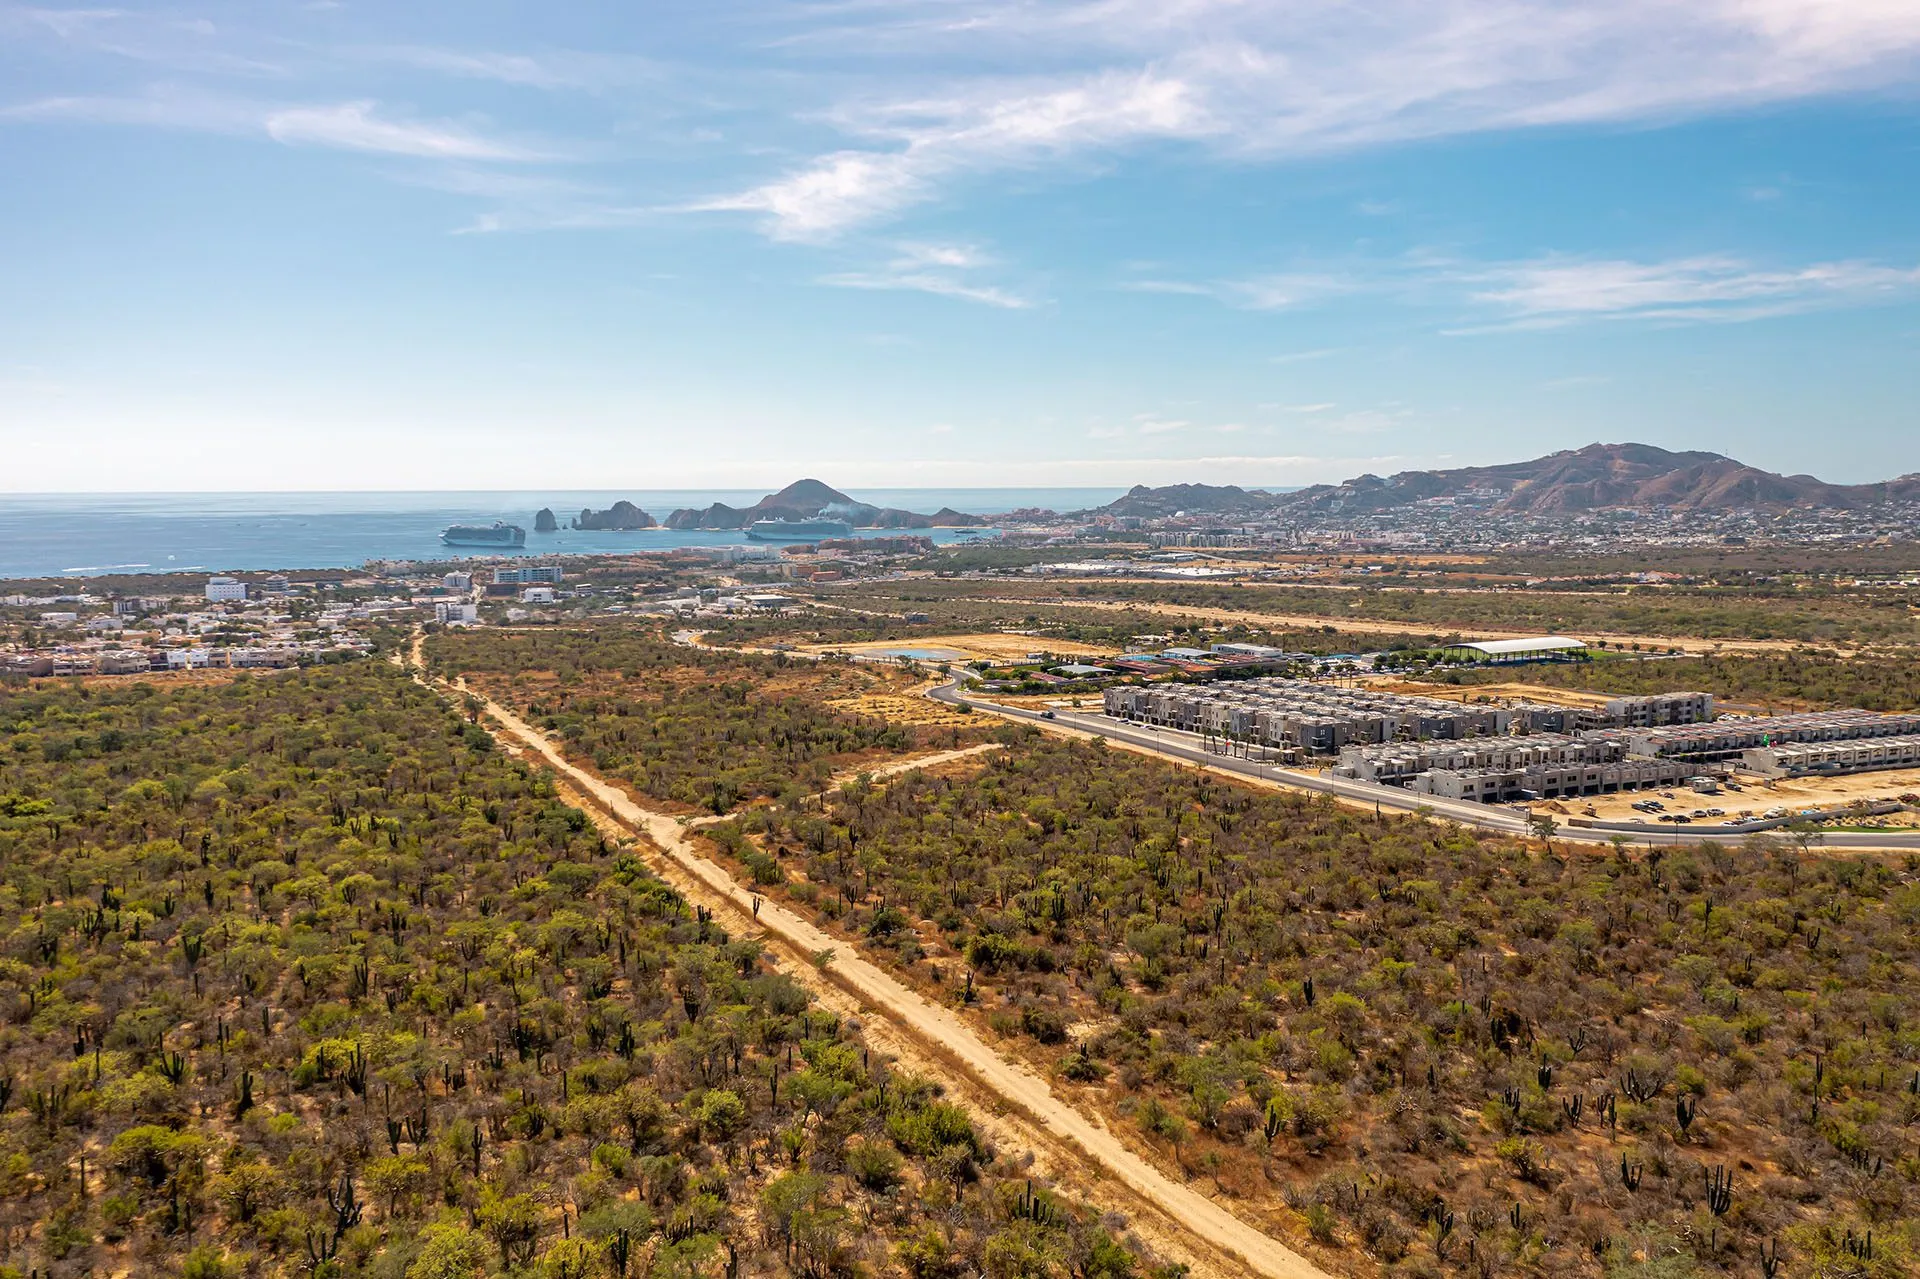 Lot V, is an excellent option for residential development. This 36 acre development parcel is located inside one of the most popular communities in Los Cabos.